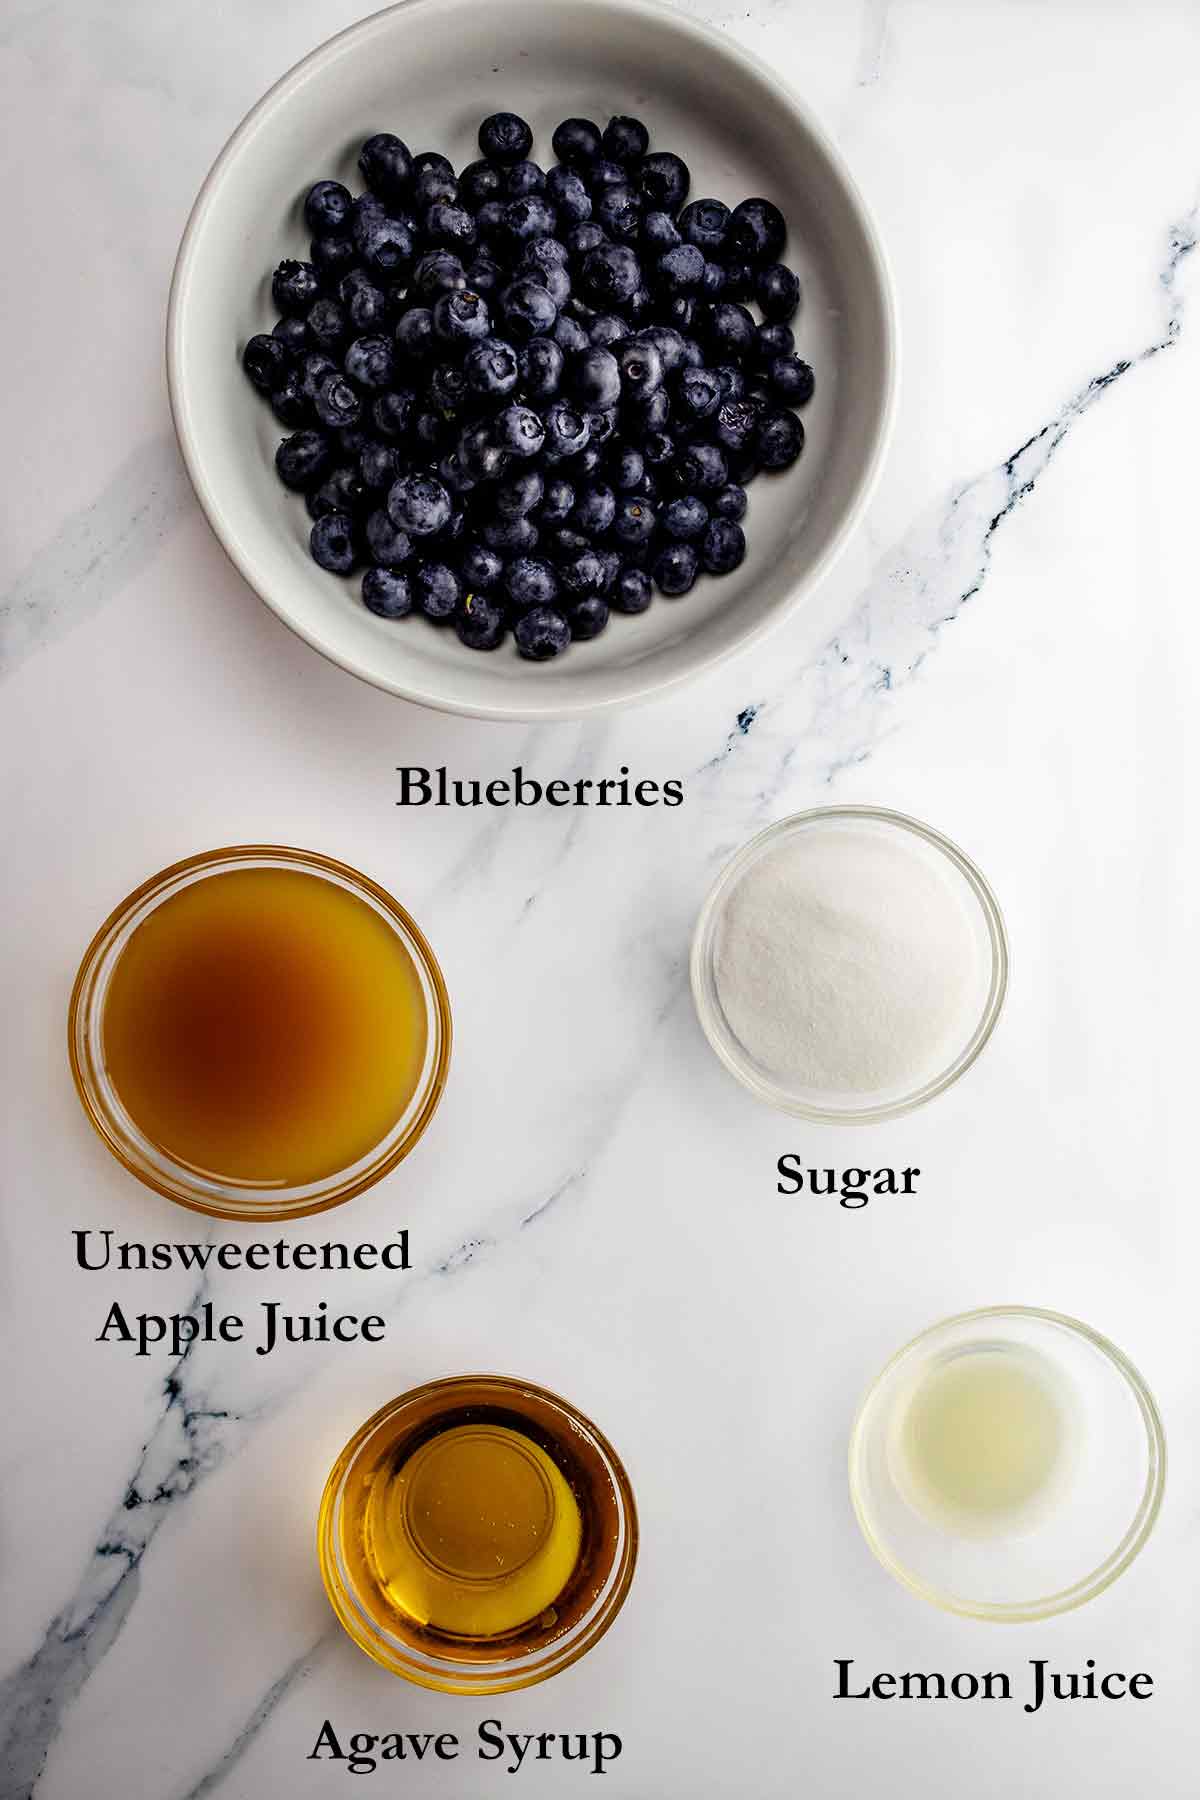 Overhead view of blueberry syrup ingredients